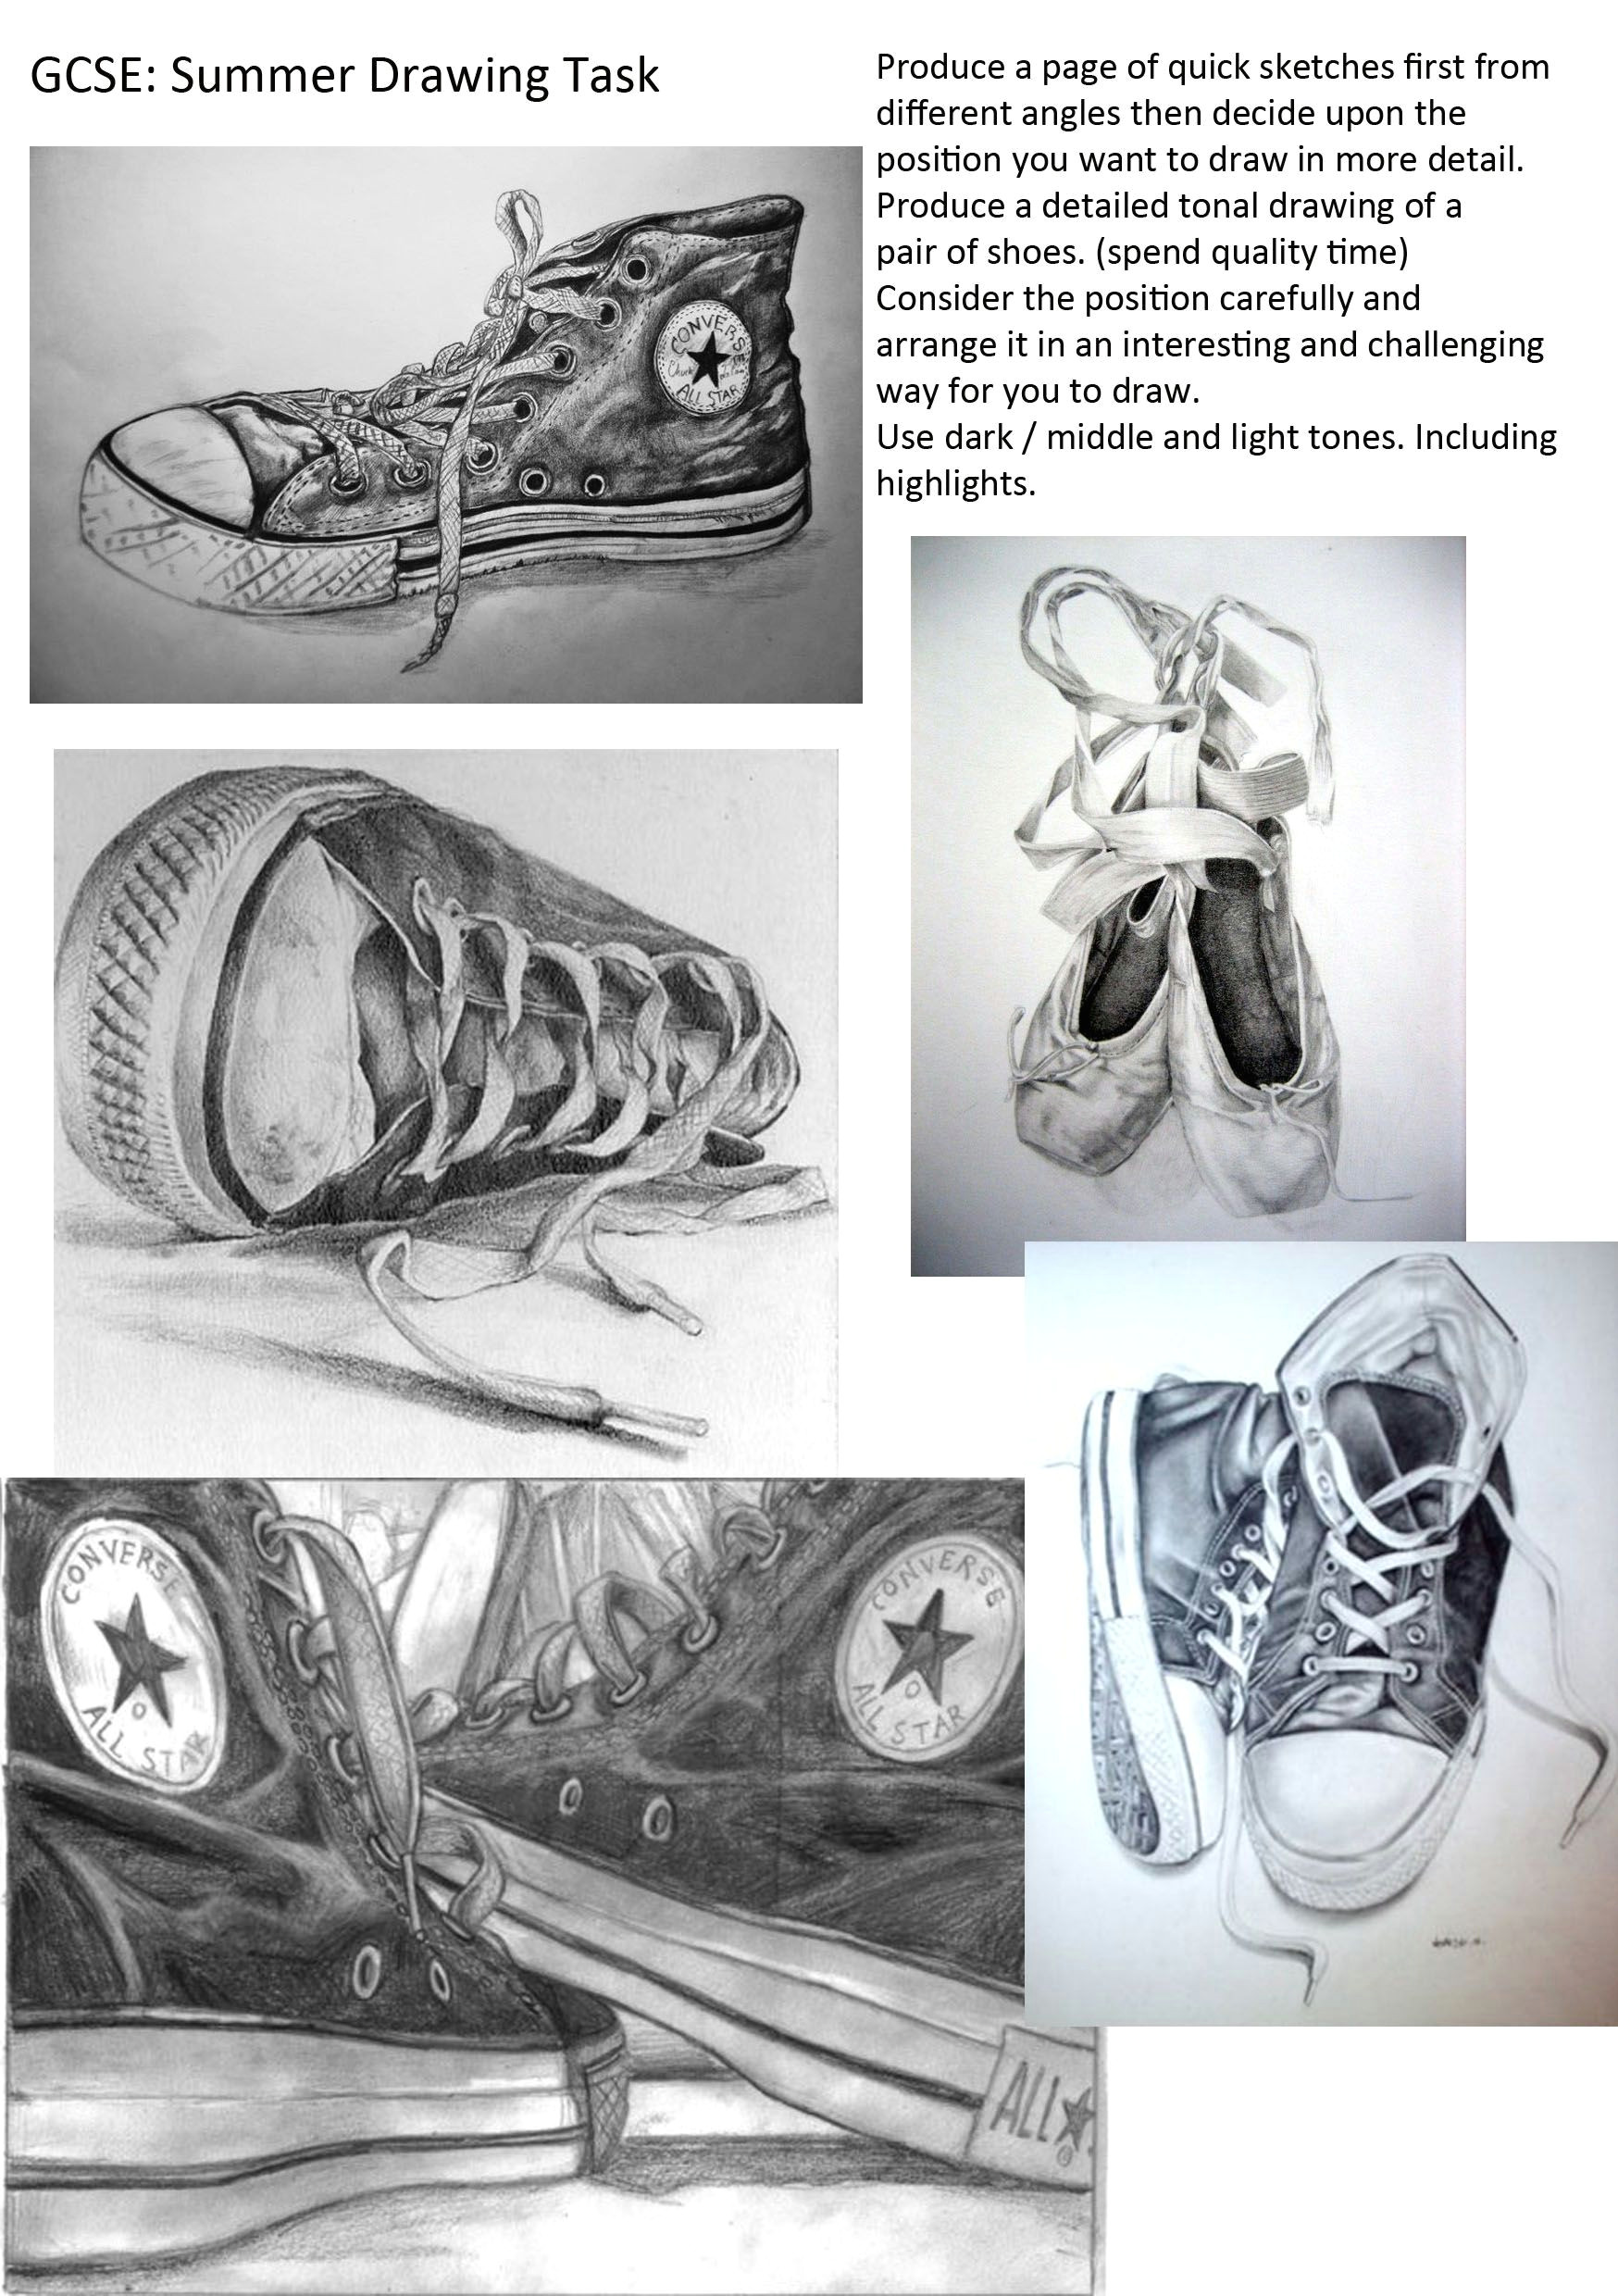 Drawing On White Shoes Ideas I Found This Task and thought that It Can Apply to Just